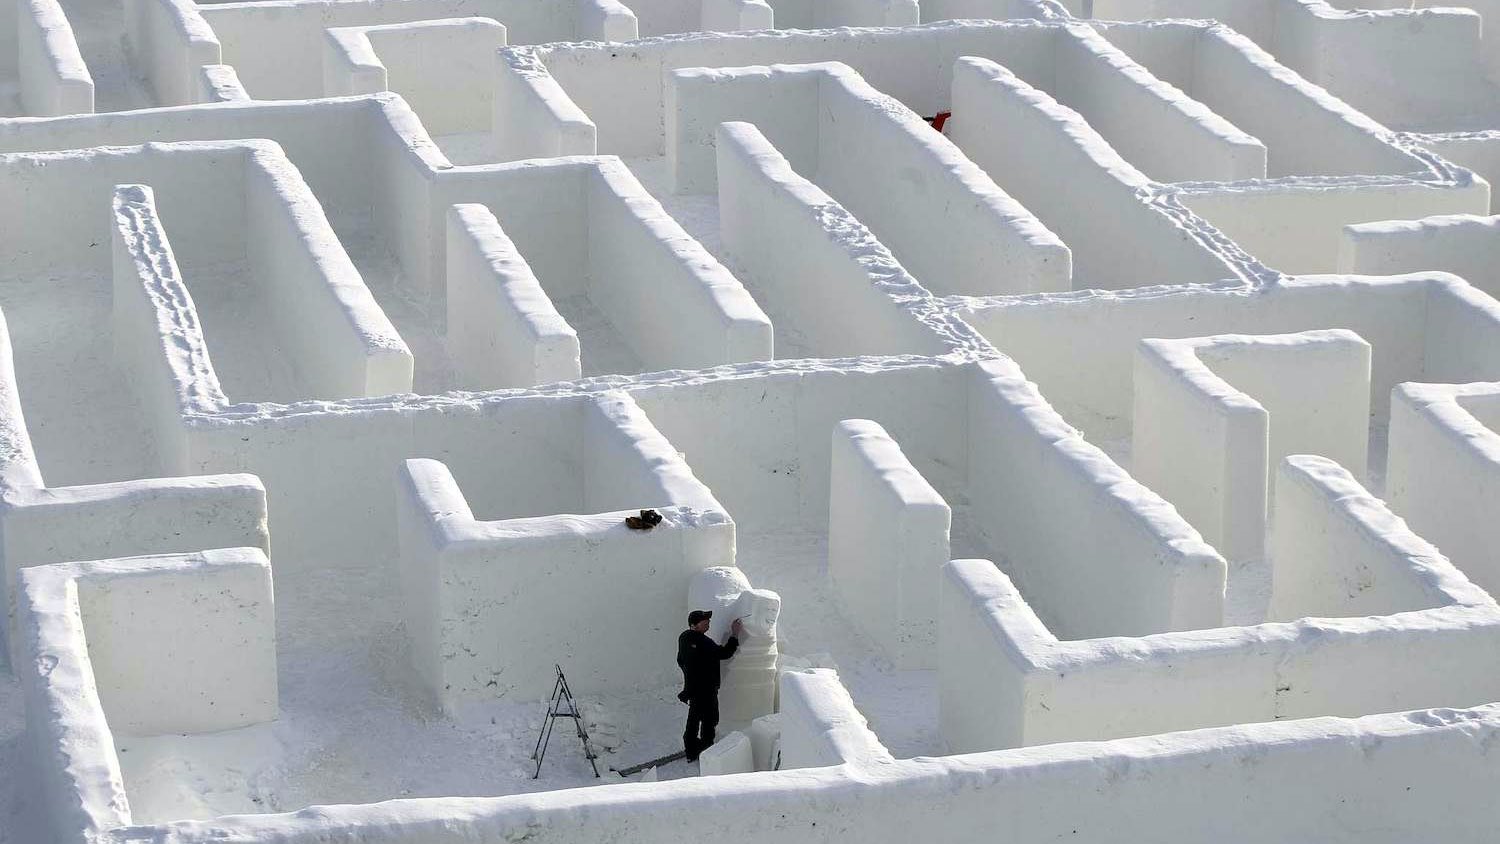 Canada is the home of the World’s Largest Snow Maze